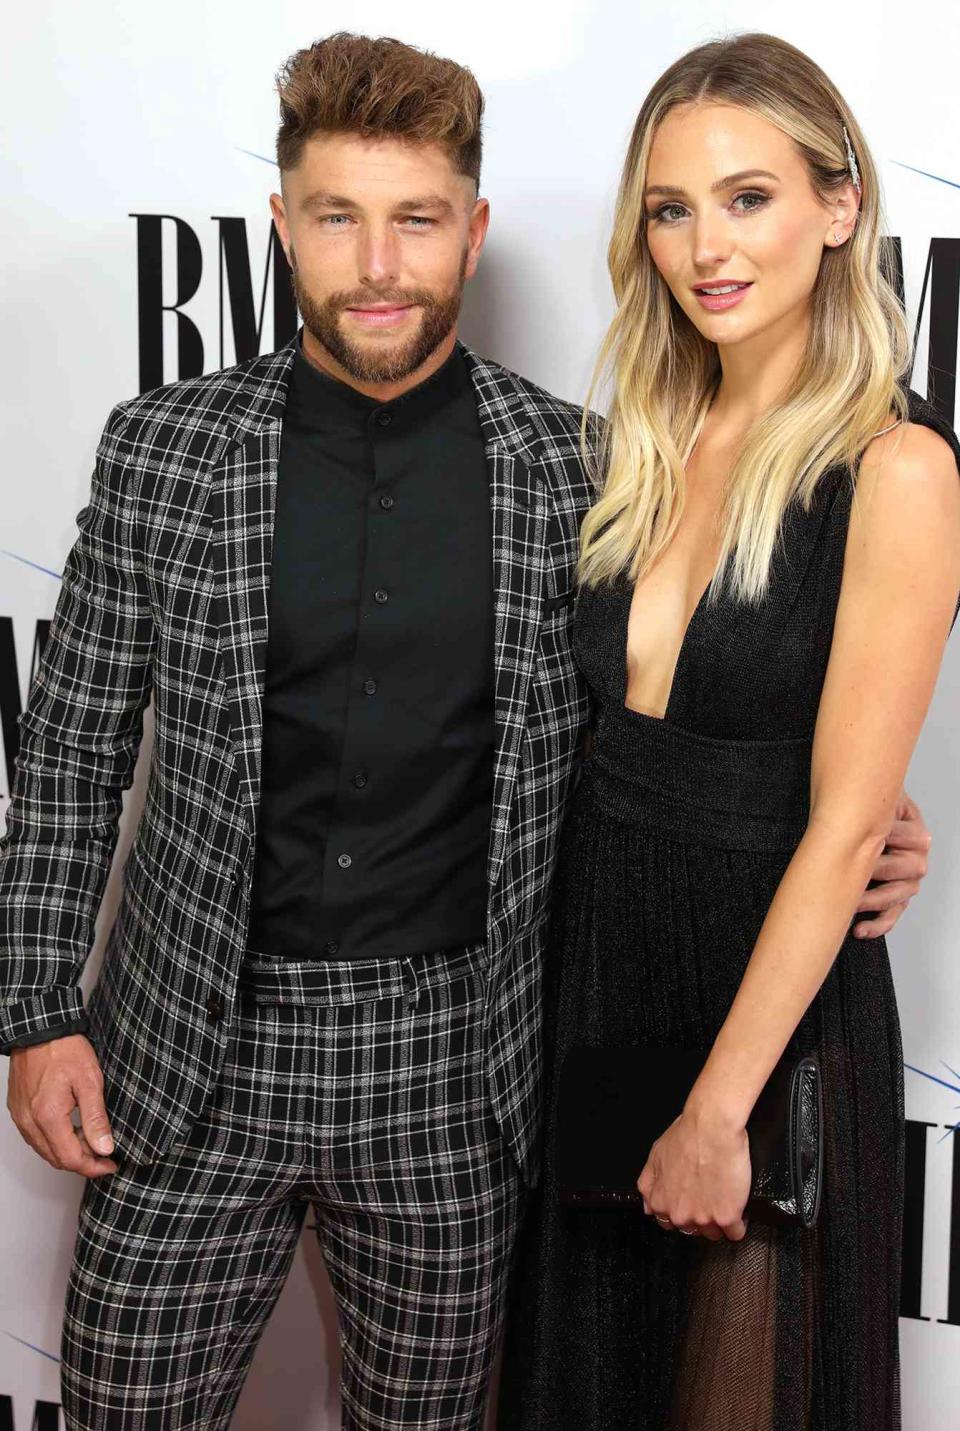 Chris Lane and Lauren Bushnell attend the 66th Annual BMI Country Awards at BMI on November 13, 2018 in Nashville, Tennessee